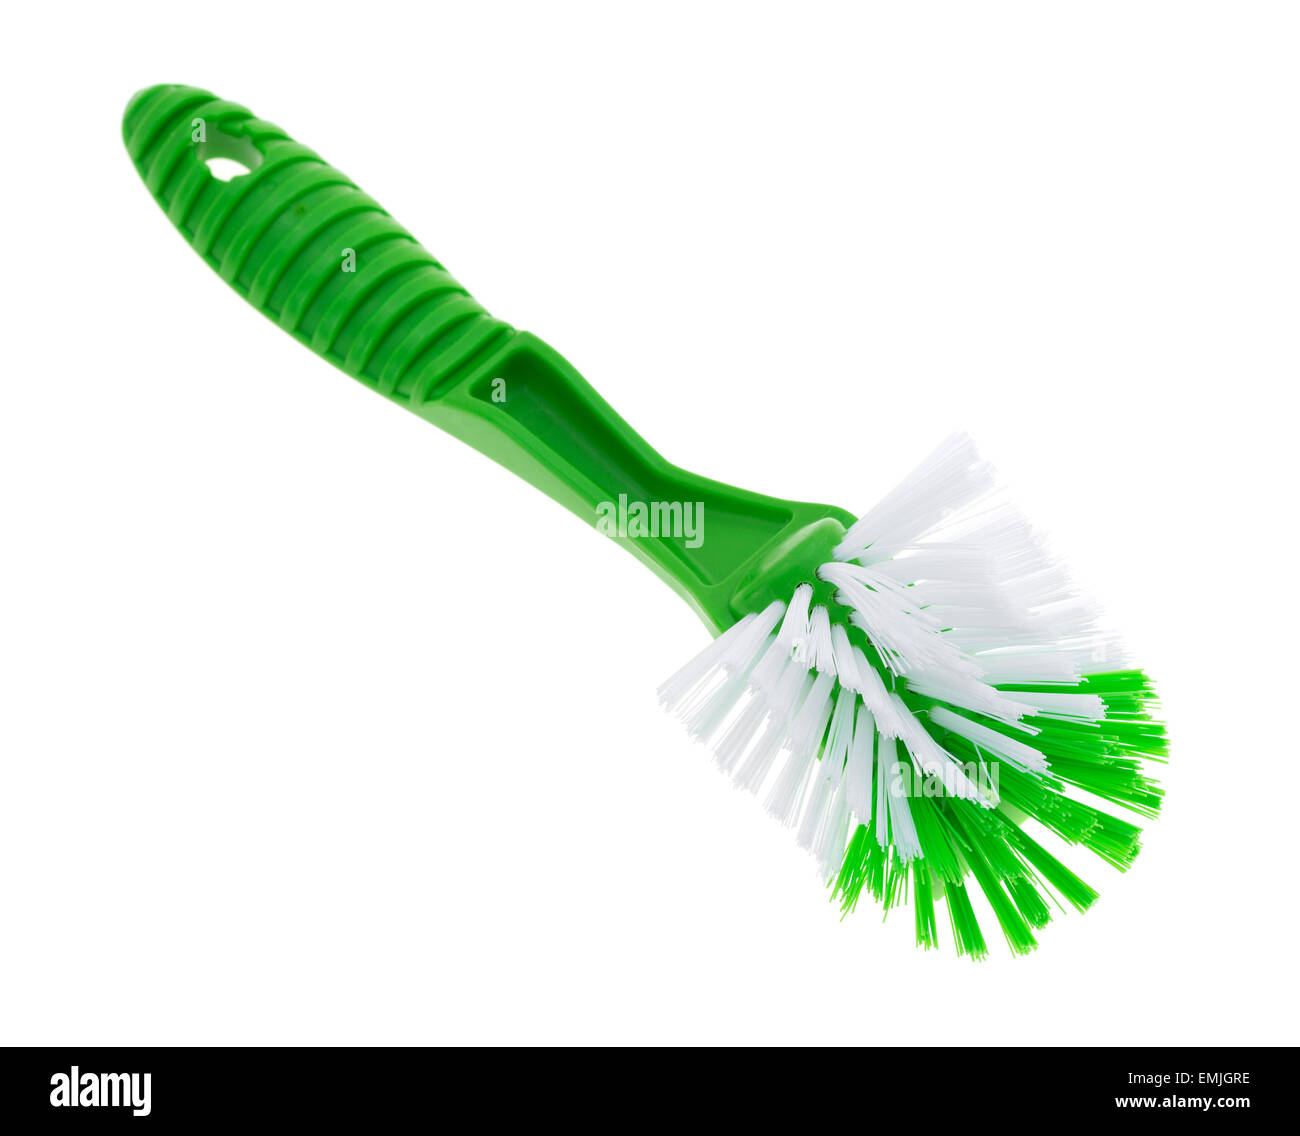 A new bristle cleaning brush on a white background. Stock Photo